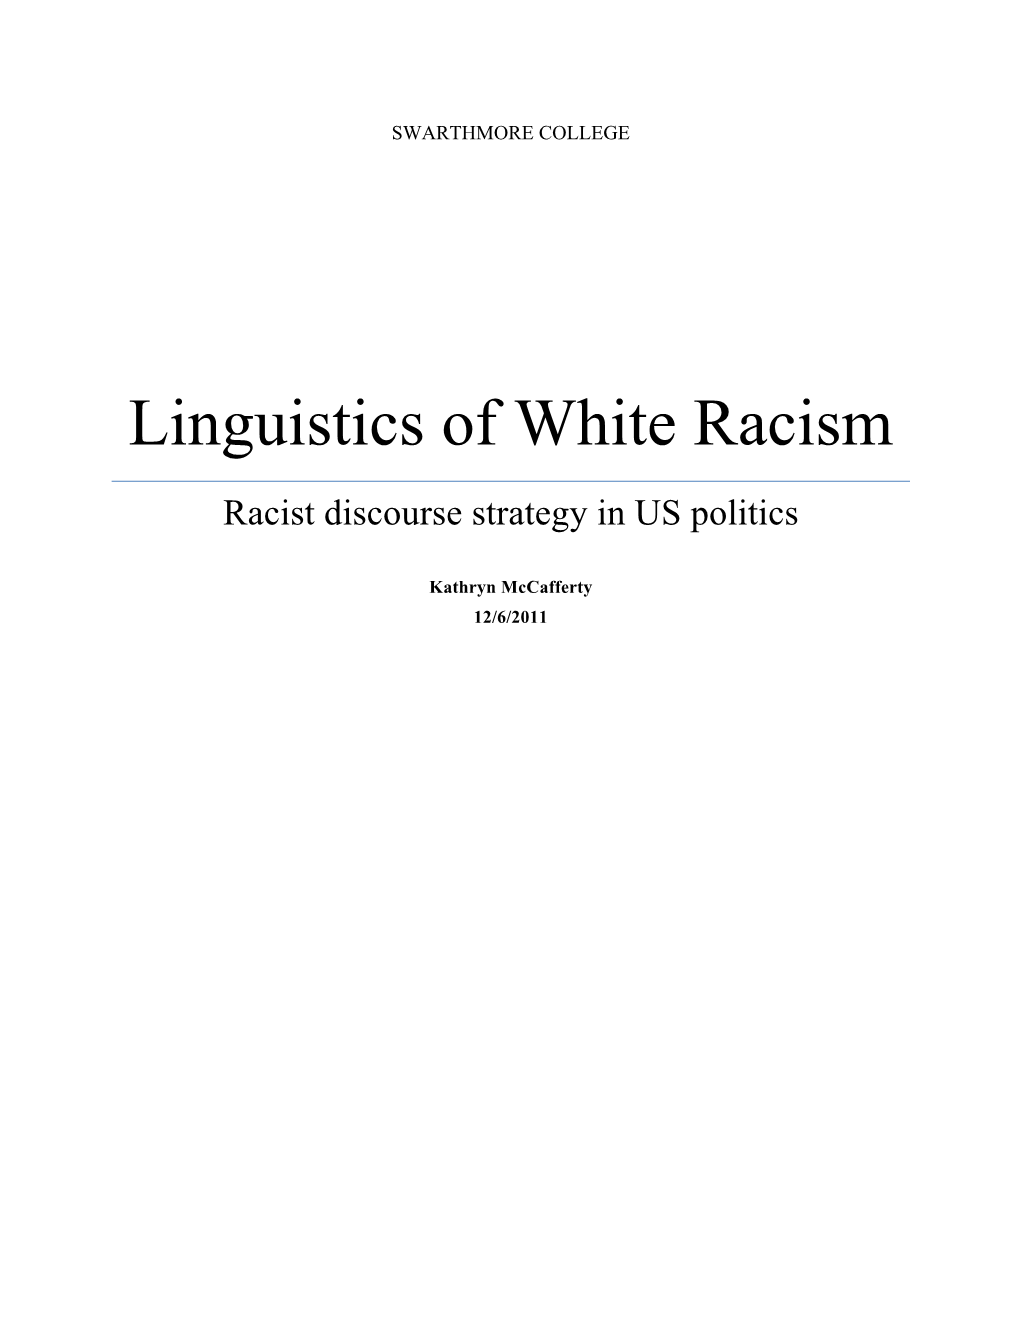 Linguistics of White Racism: Racist Discourse Strategy in US Politics